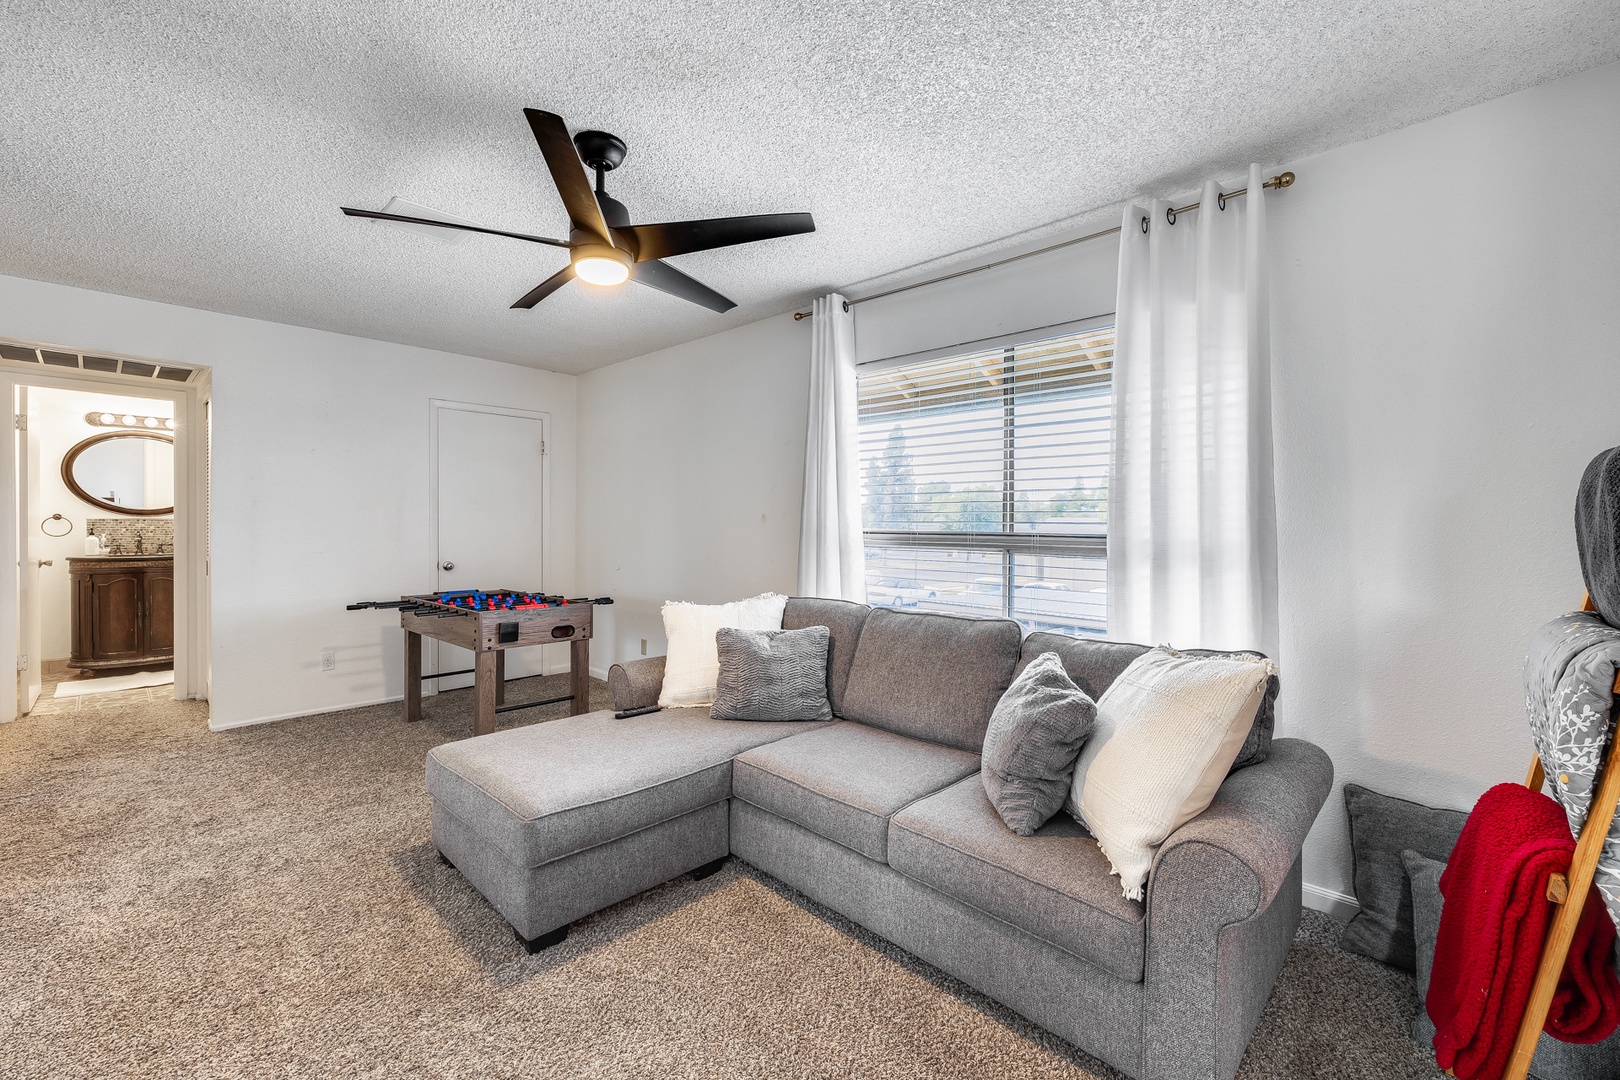 Glendale Vacation Rentals, Condo at the Bell Air - This space can also be used as an additional sleeping space